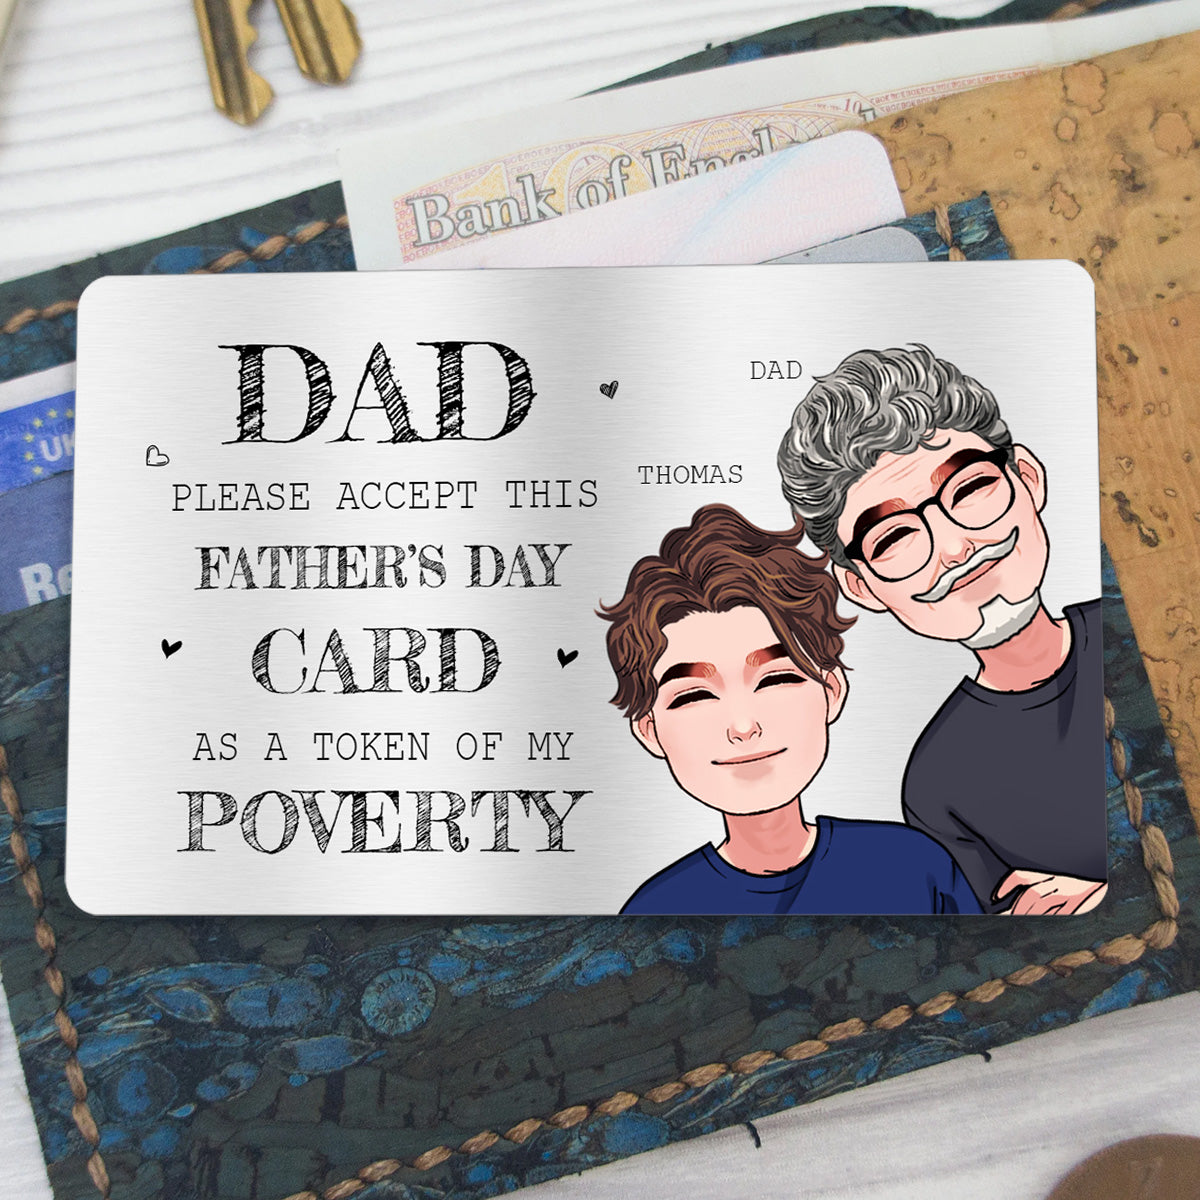 Please Accept This - Personalized Father Wallet Insert Card